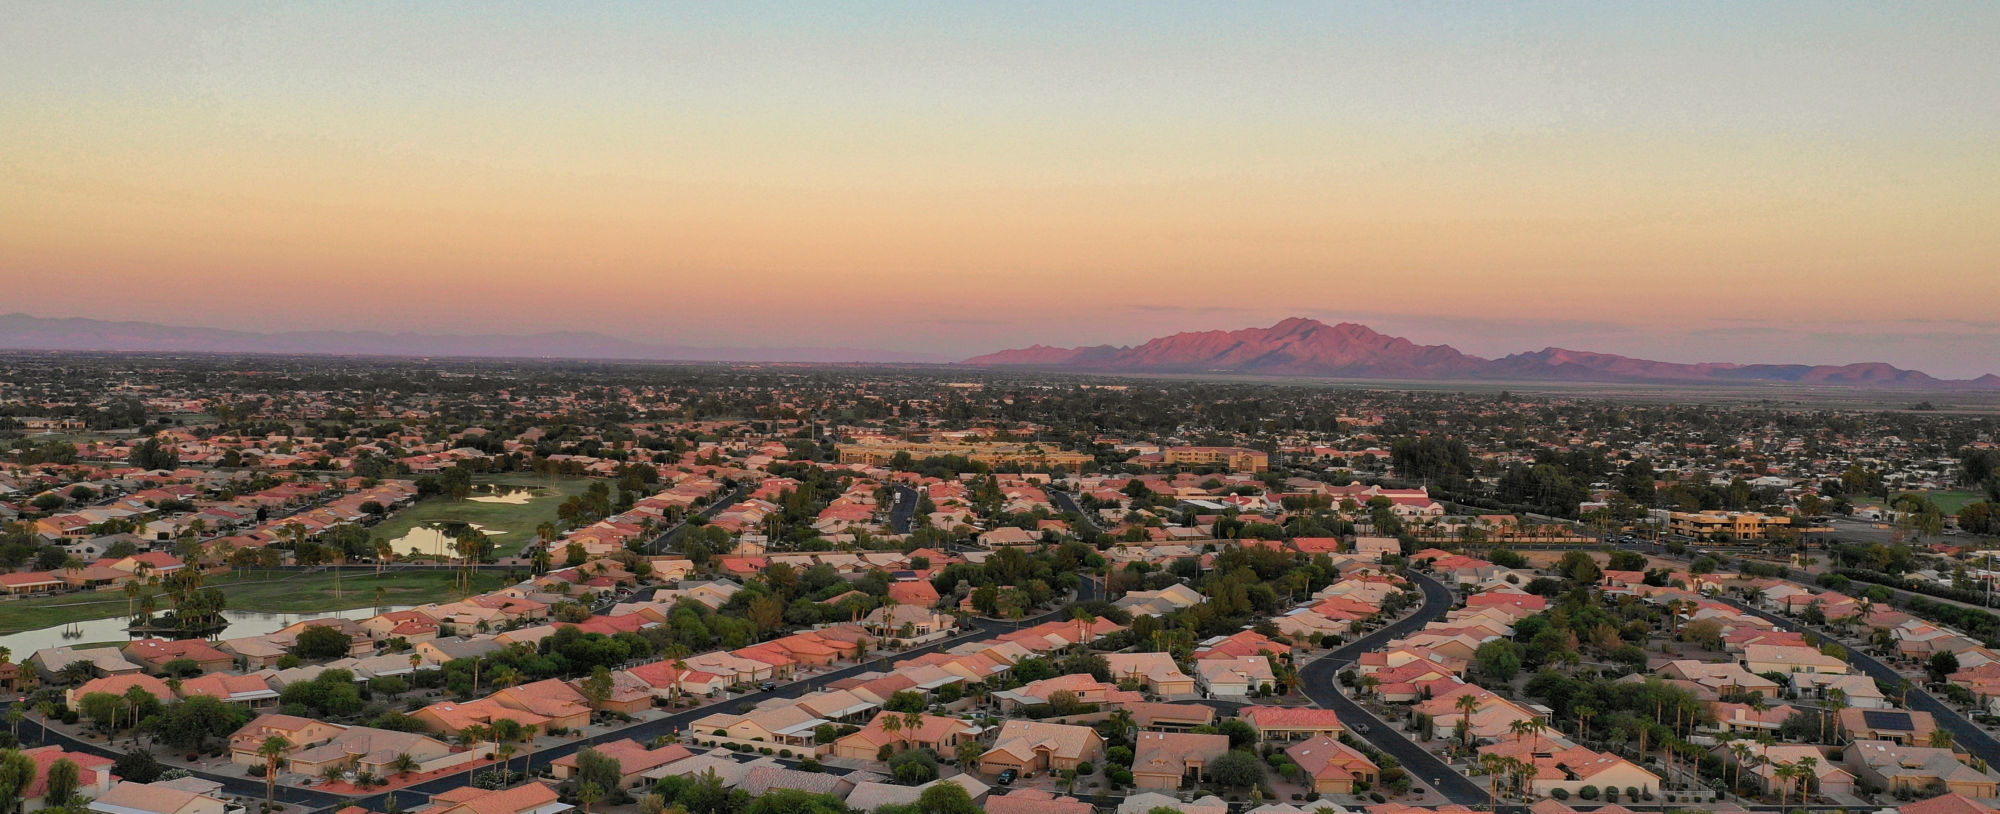 Home Security in Chandler, Arizona